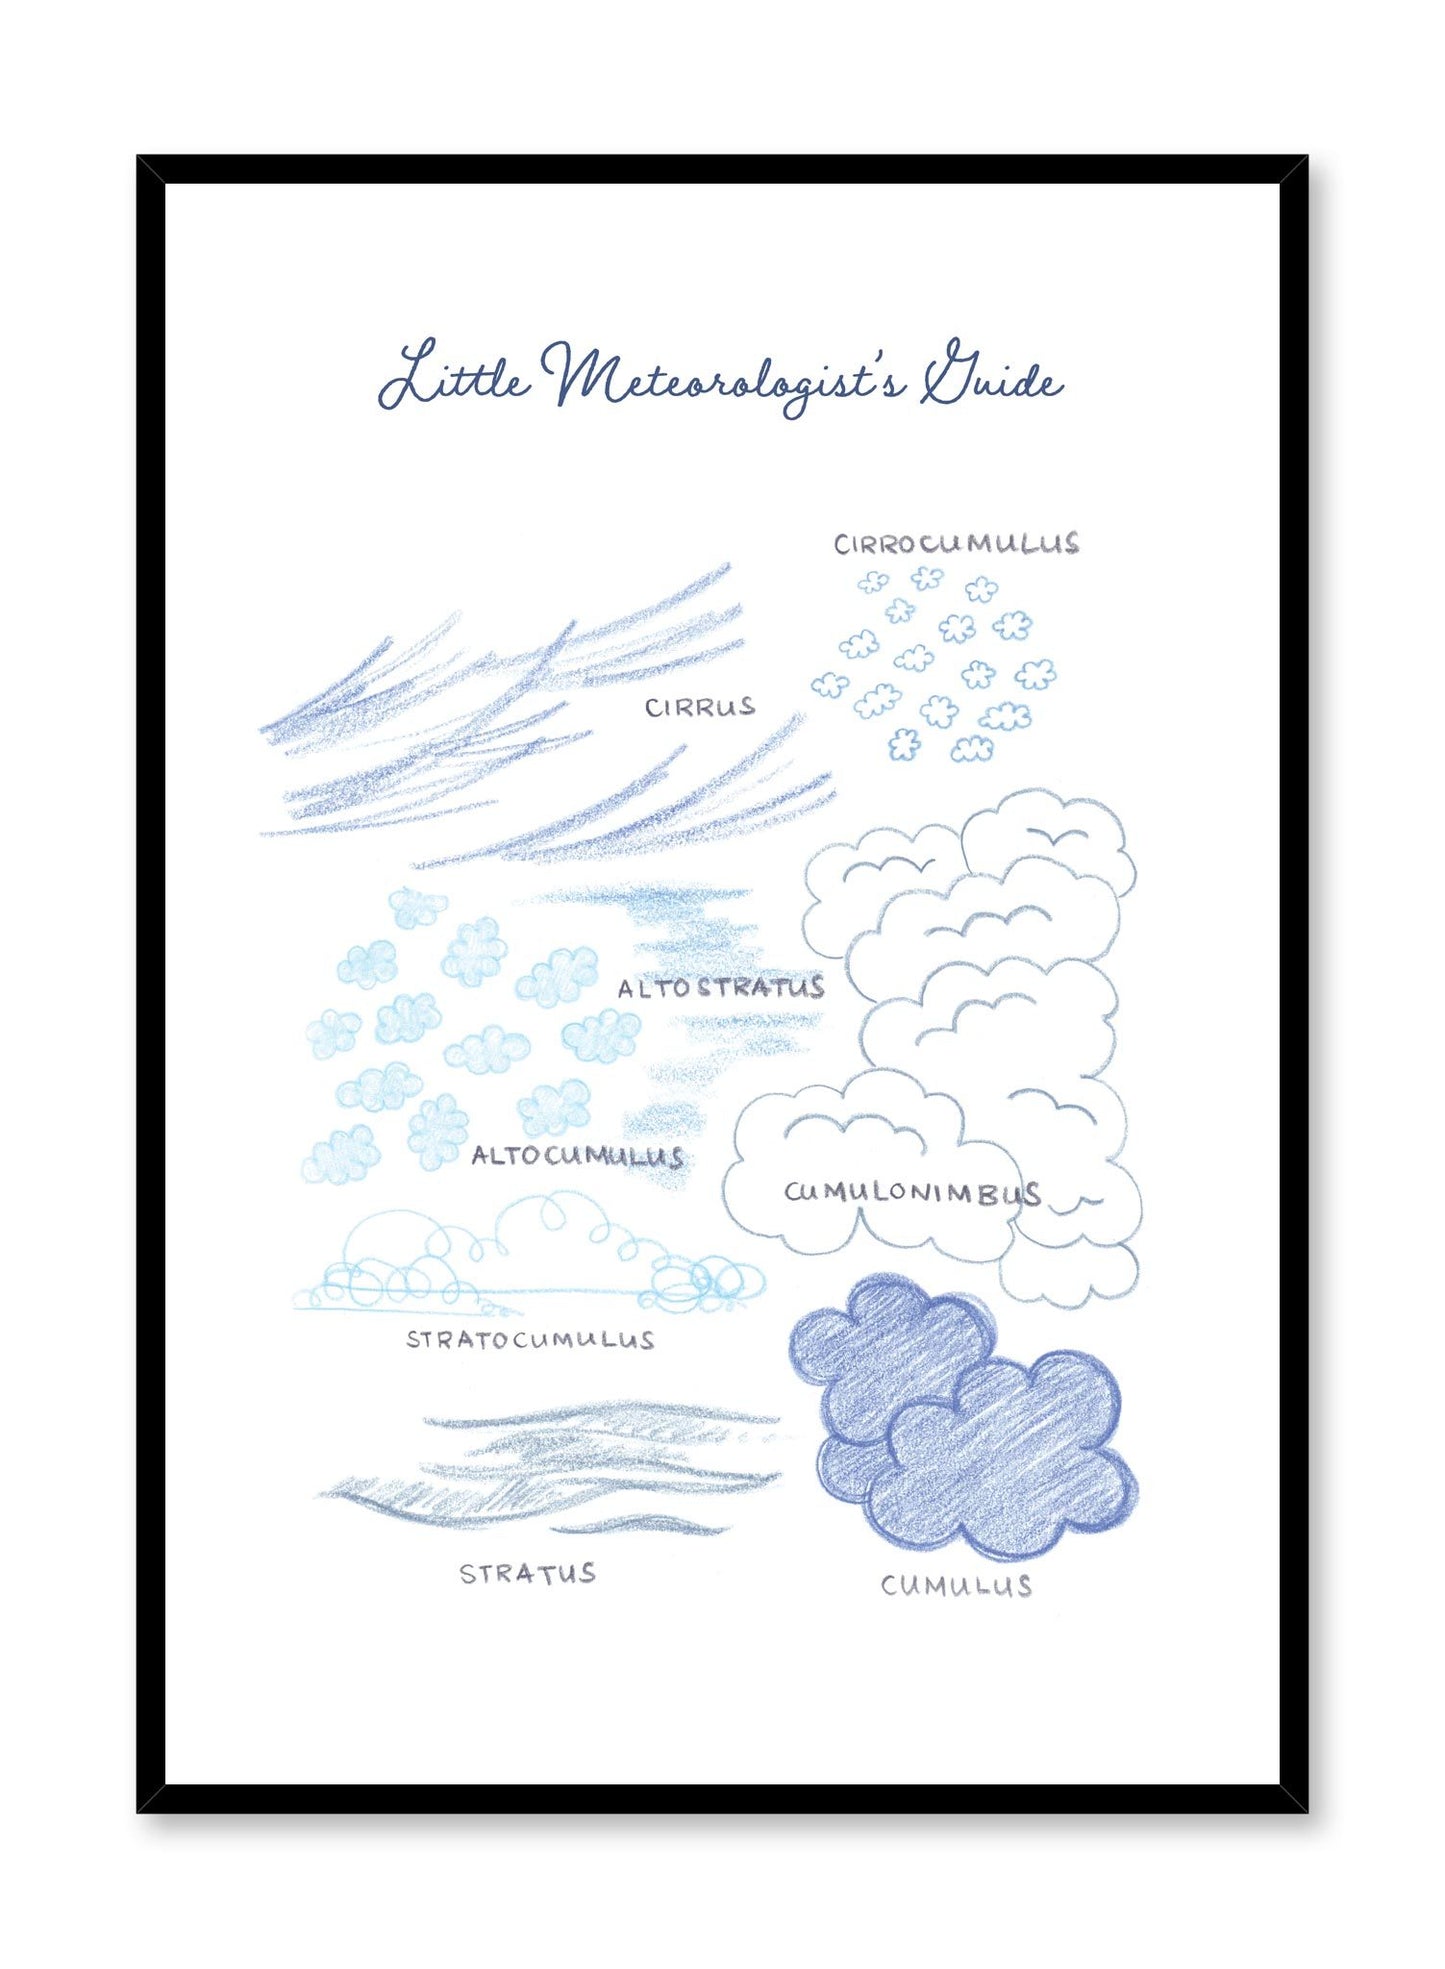 Little Meteorologist’s Guide is a minimalist illustration by Opposite Wall of different types of cloud formations.